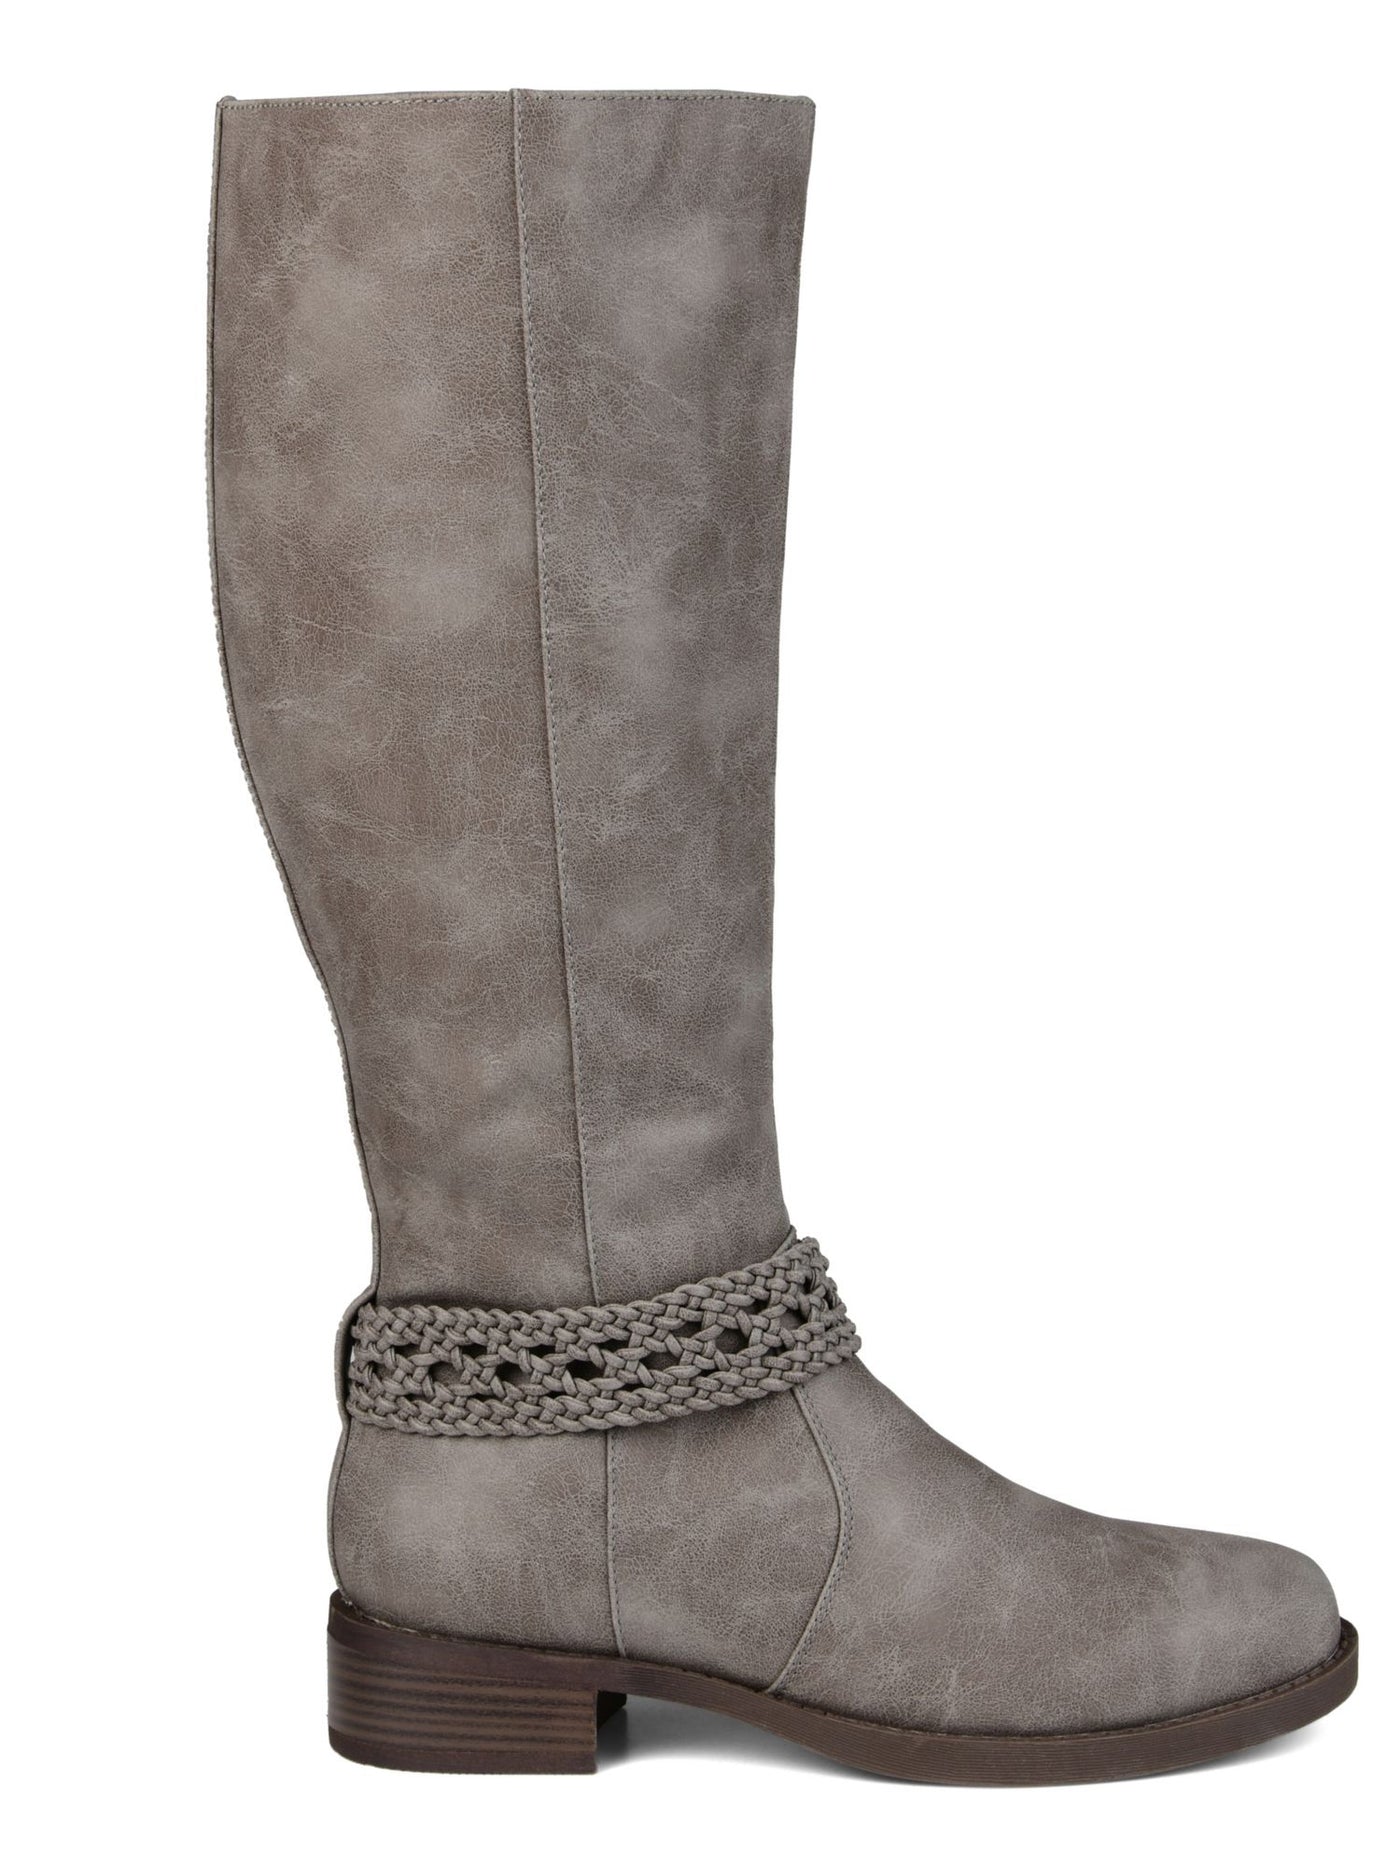 JOURNEE COLLECTION Womens Gray Distressed Ankle Strap Stretch Paisley Round Toe Zip-Up Riding Boot 6